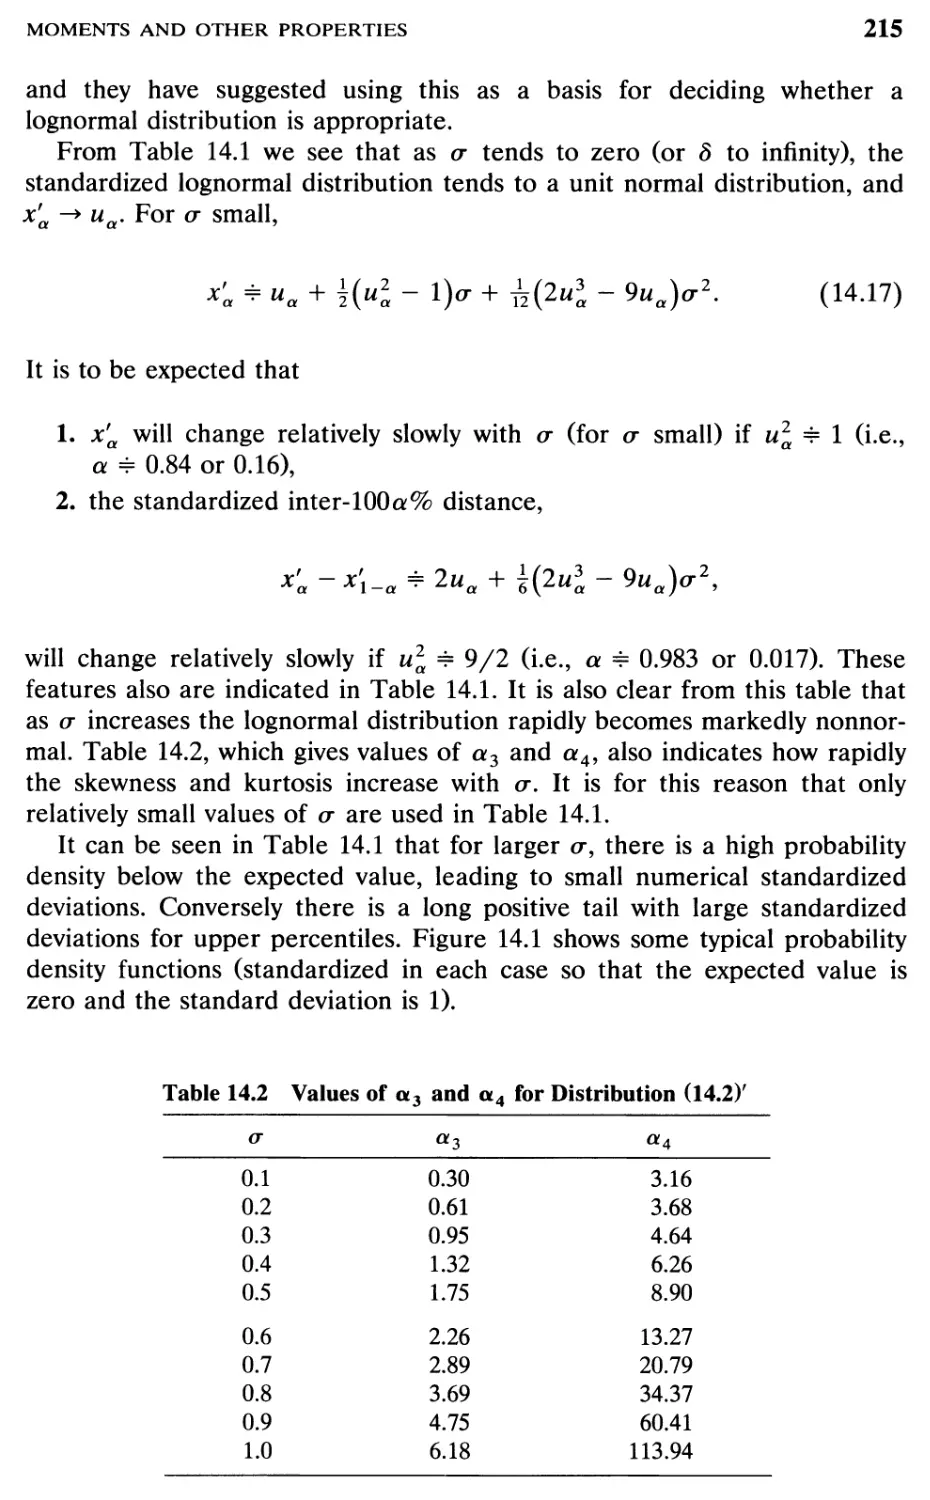 TABLE 14.2 Values of a3 and a4 for distribution (14.2y	215